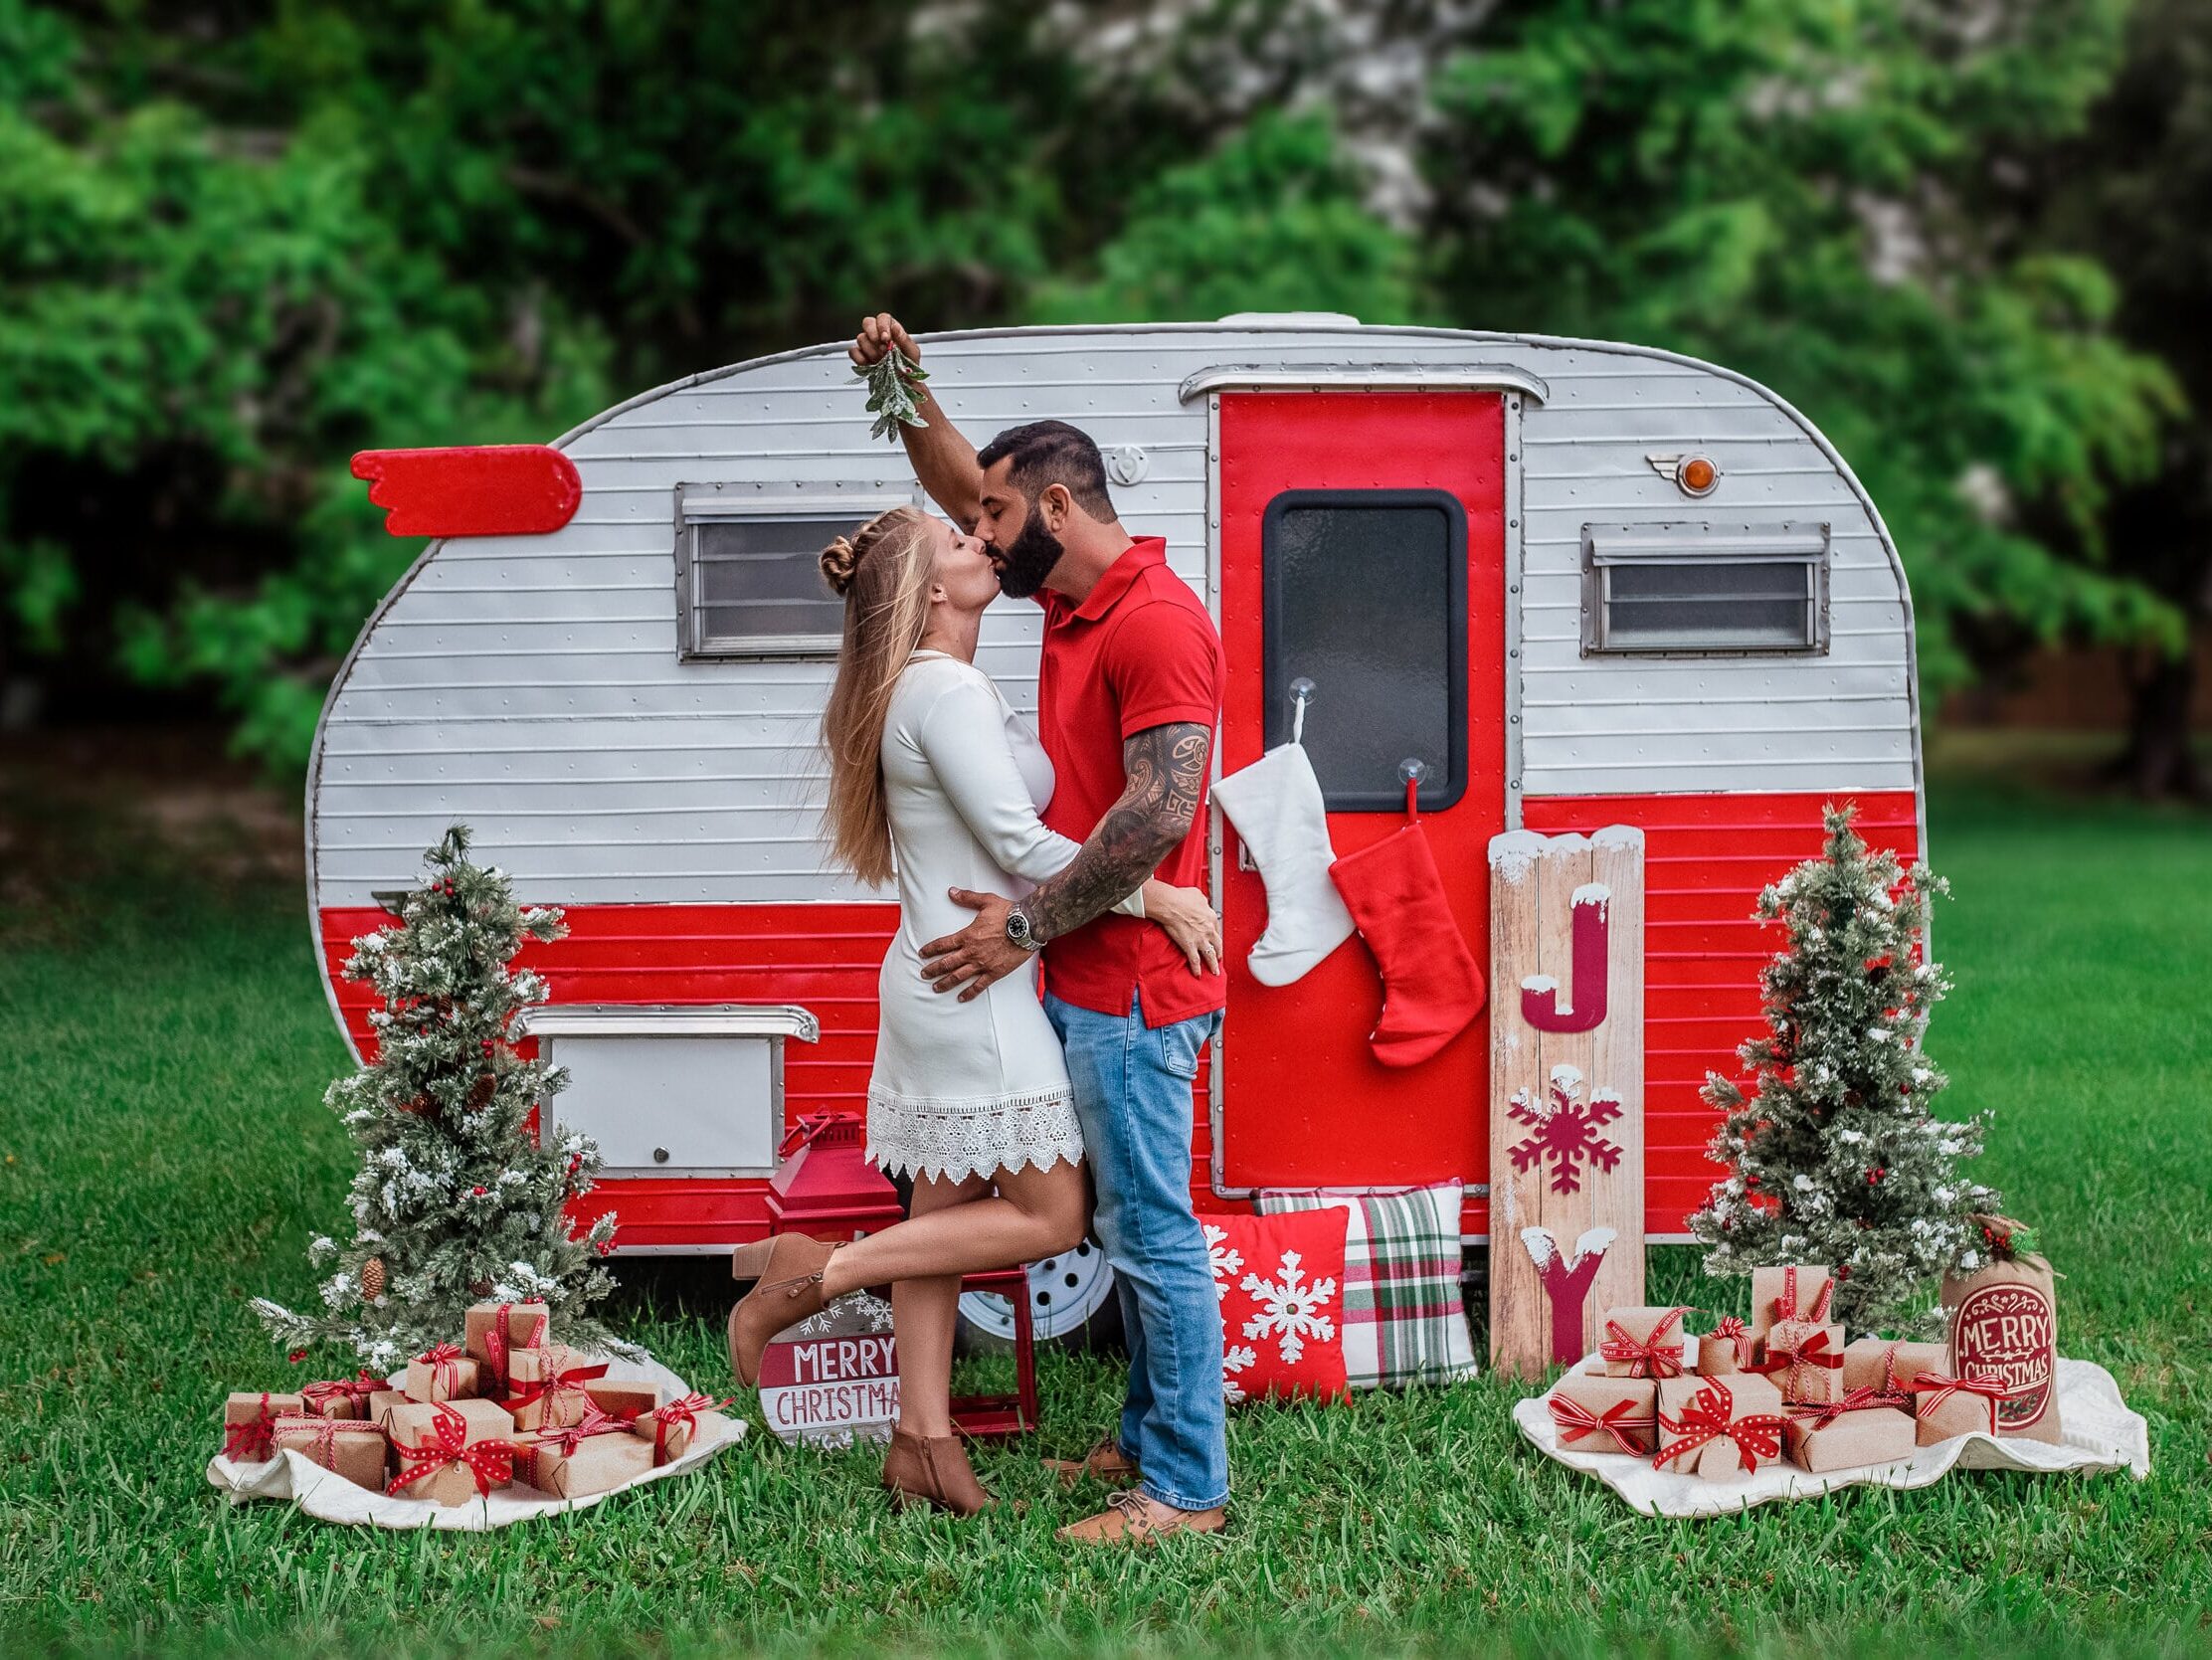 Family Christmas card ideas that show a mini camper and mistletoe | The Dating Divas